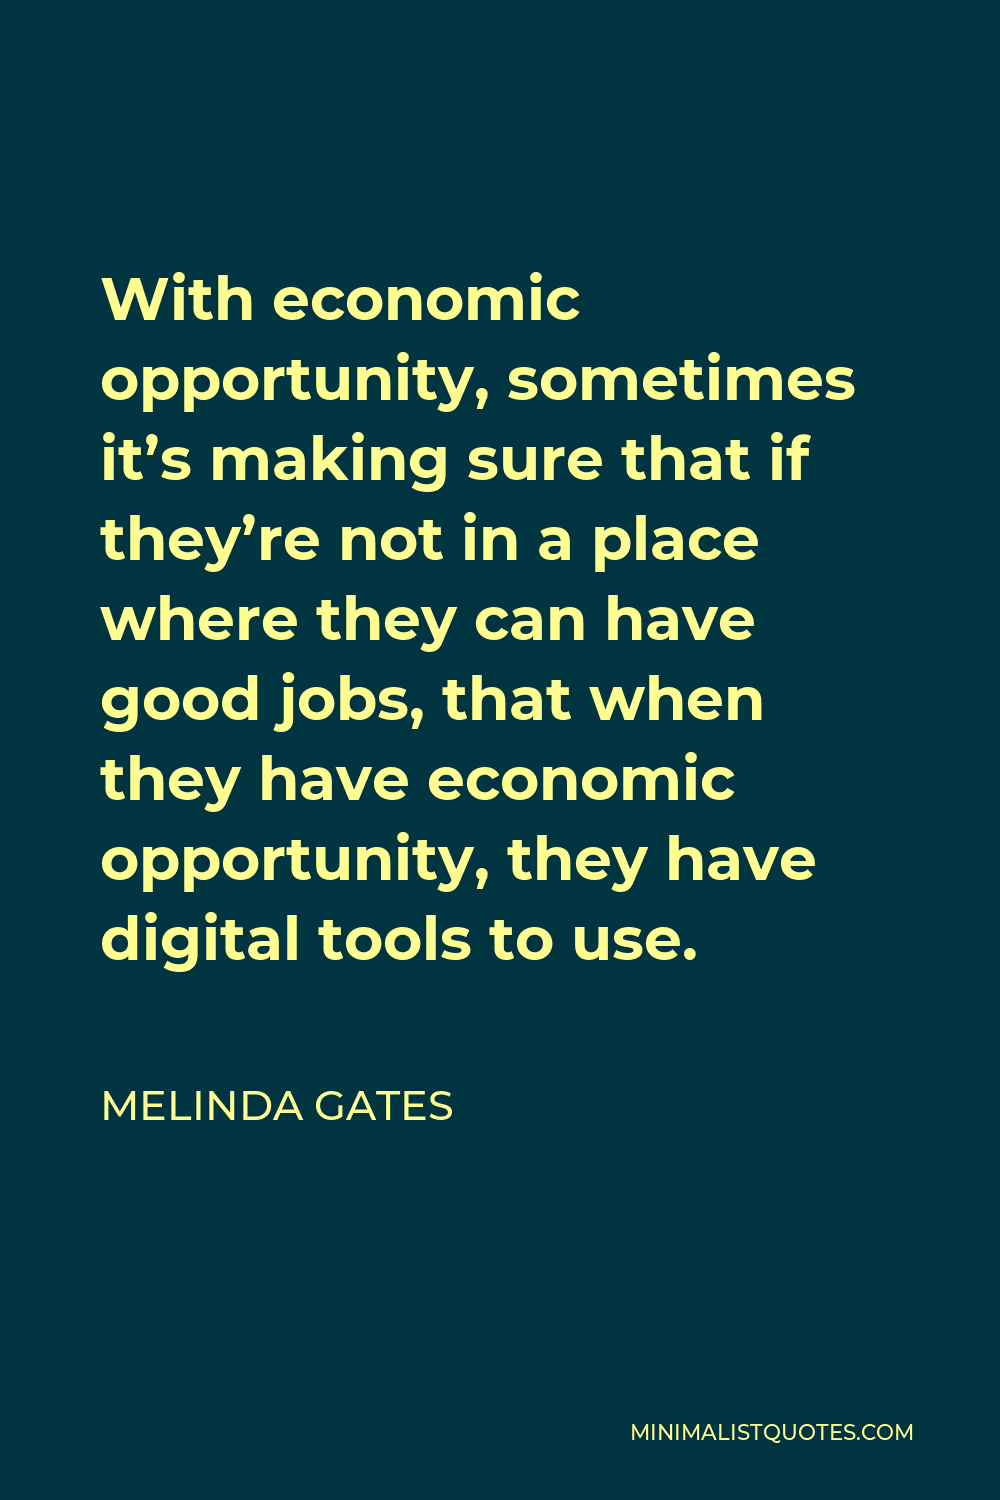 Melinda Gates Quote - With economic opportunity, sometimes it’s making sure that if they’re not in a place where they can have good jobs, that when they have economic opportunity, they have digital tools to use.